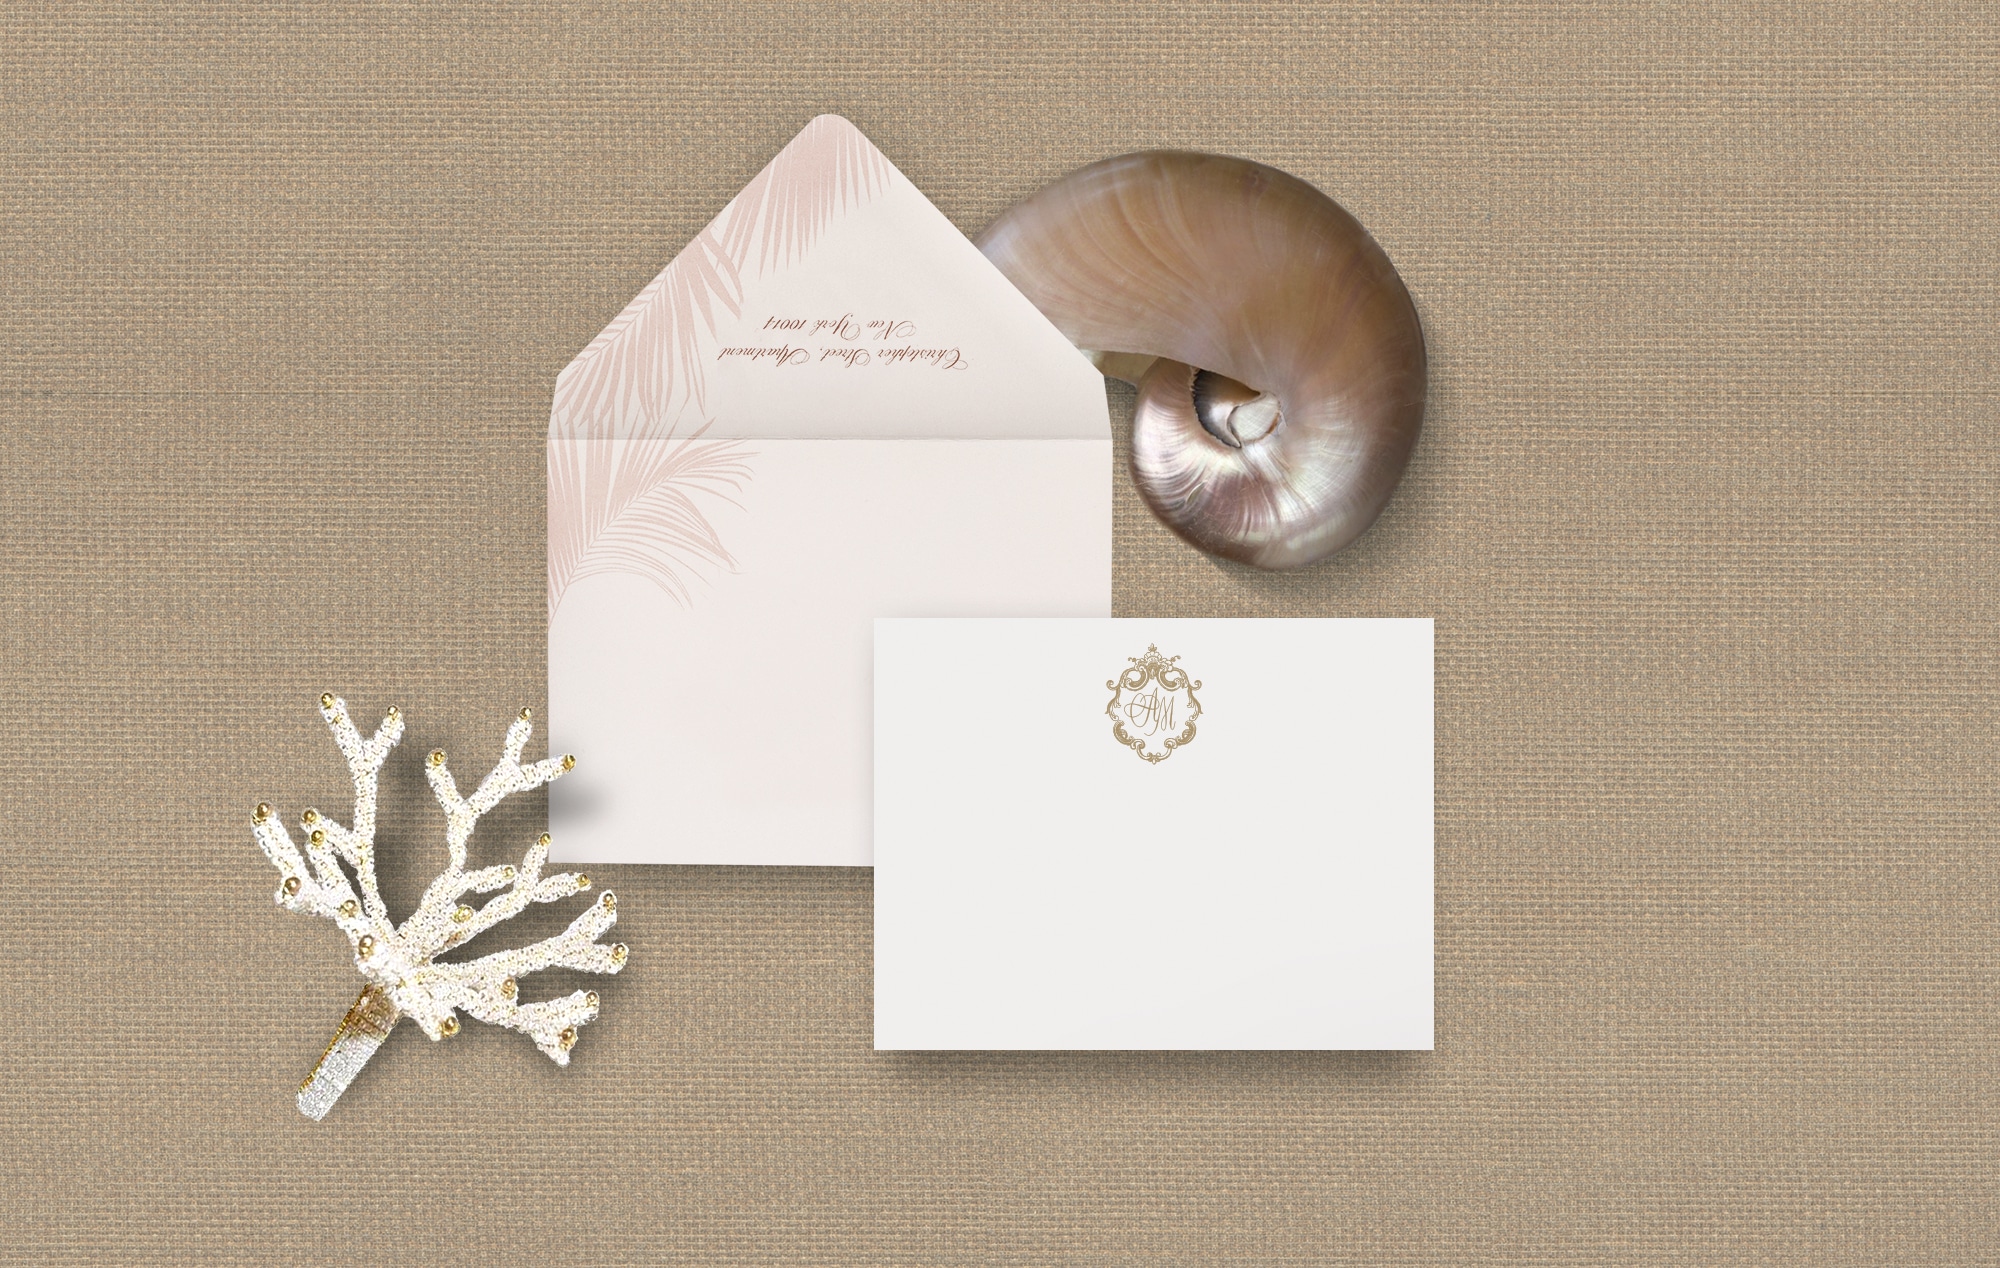 Palm Beach inspired personal stationery